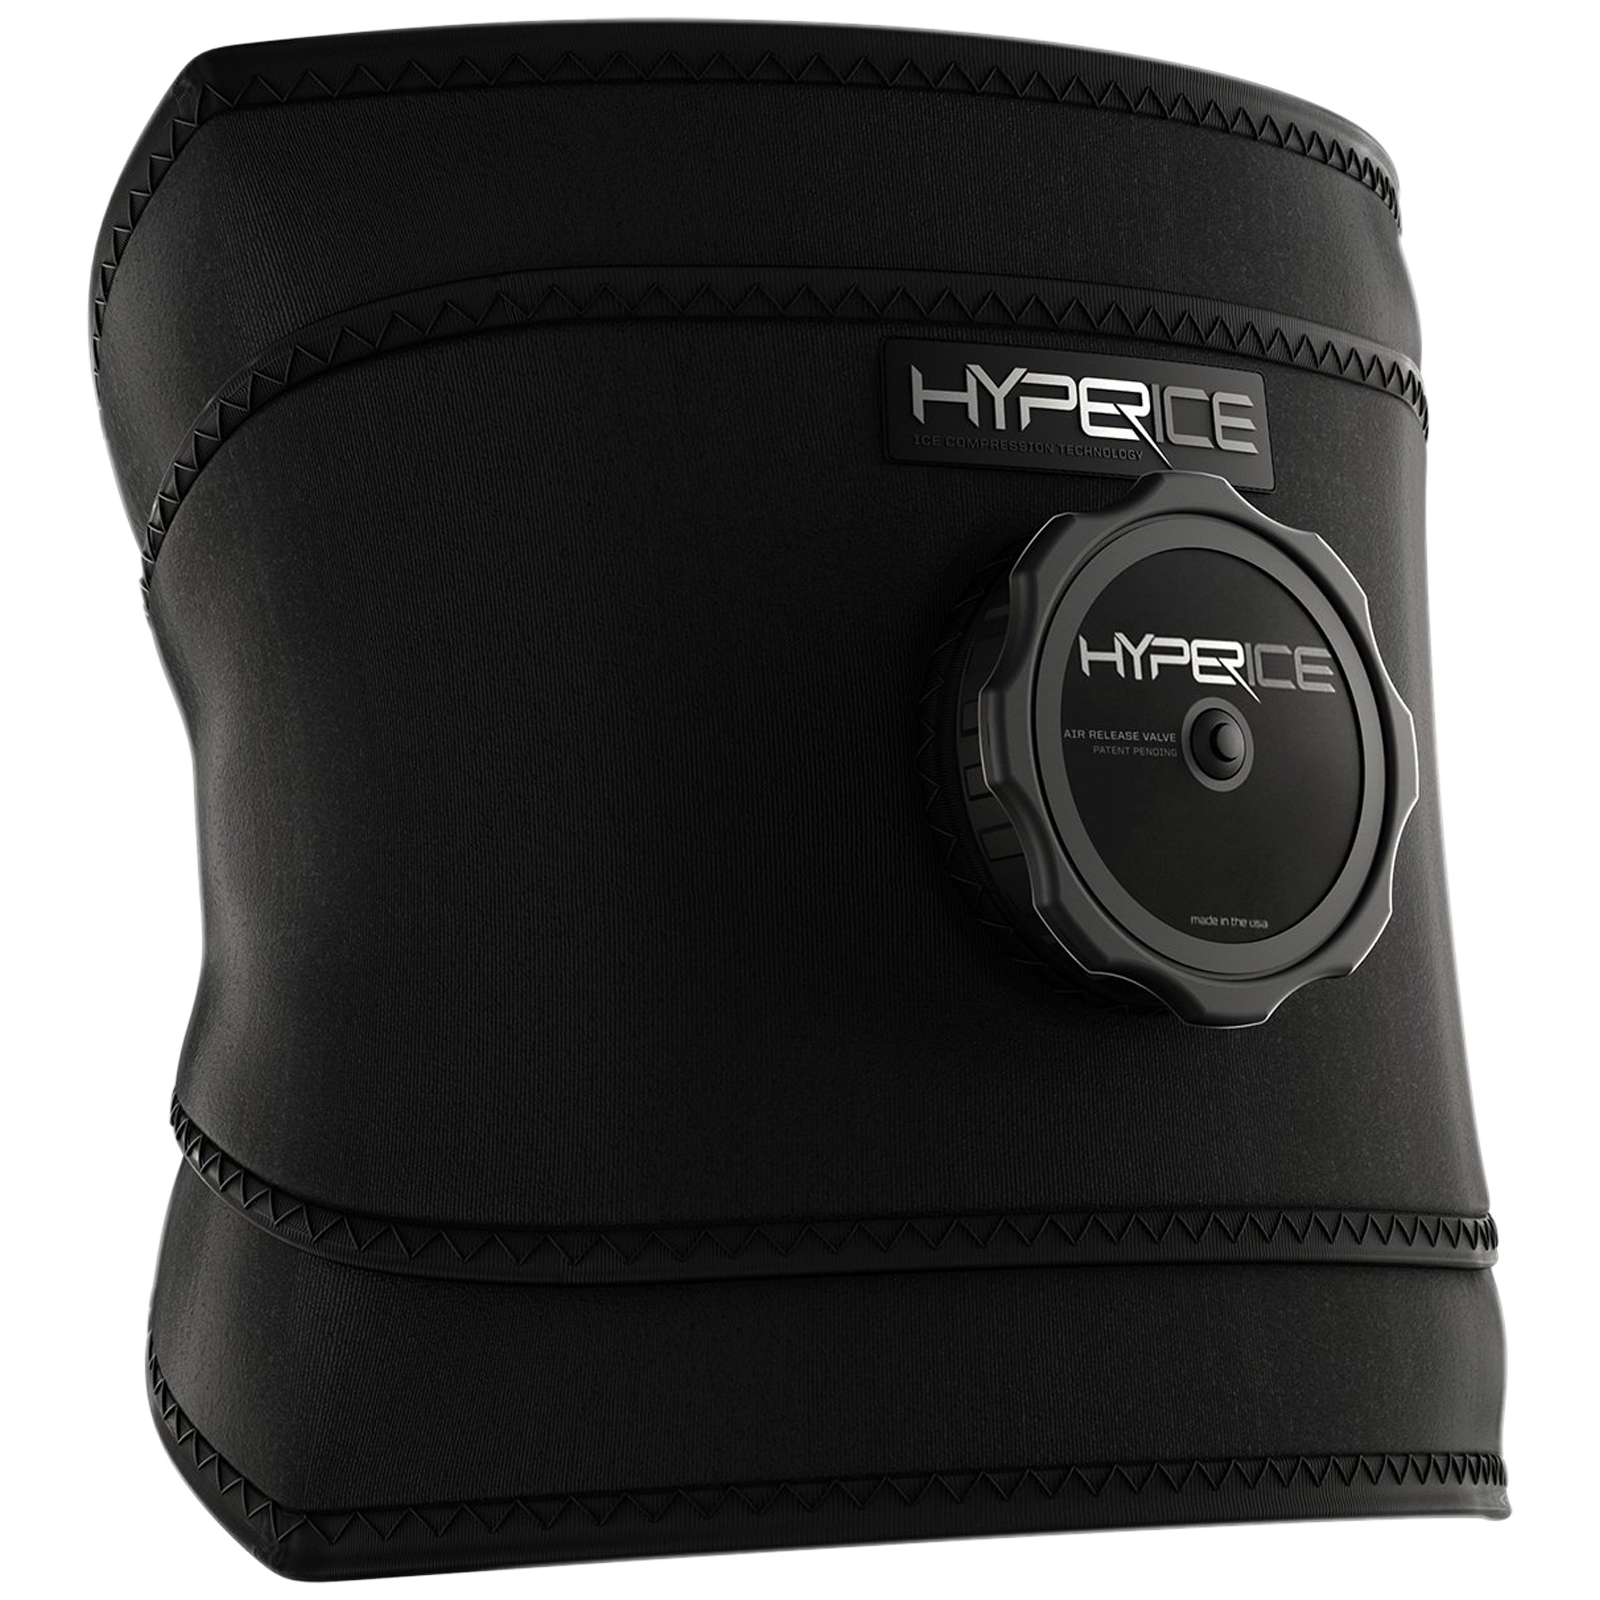 Hyperice Back Pain Reliever (Ice Compression Technology, 10040 001-00, Black)_1